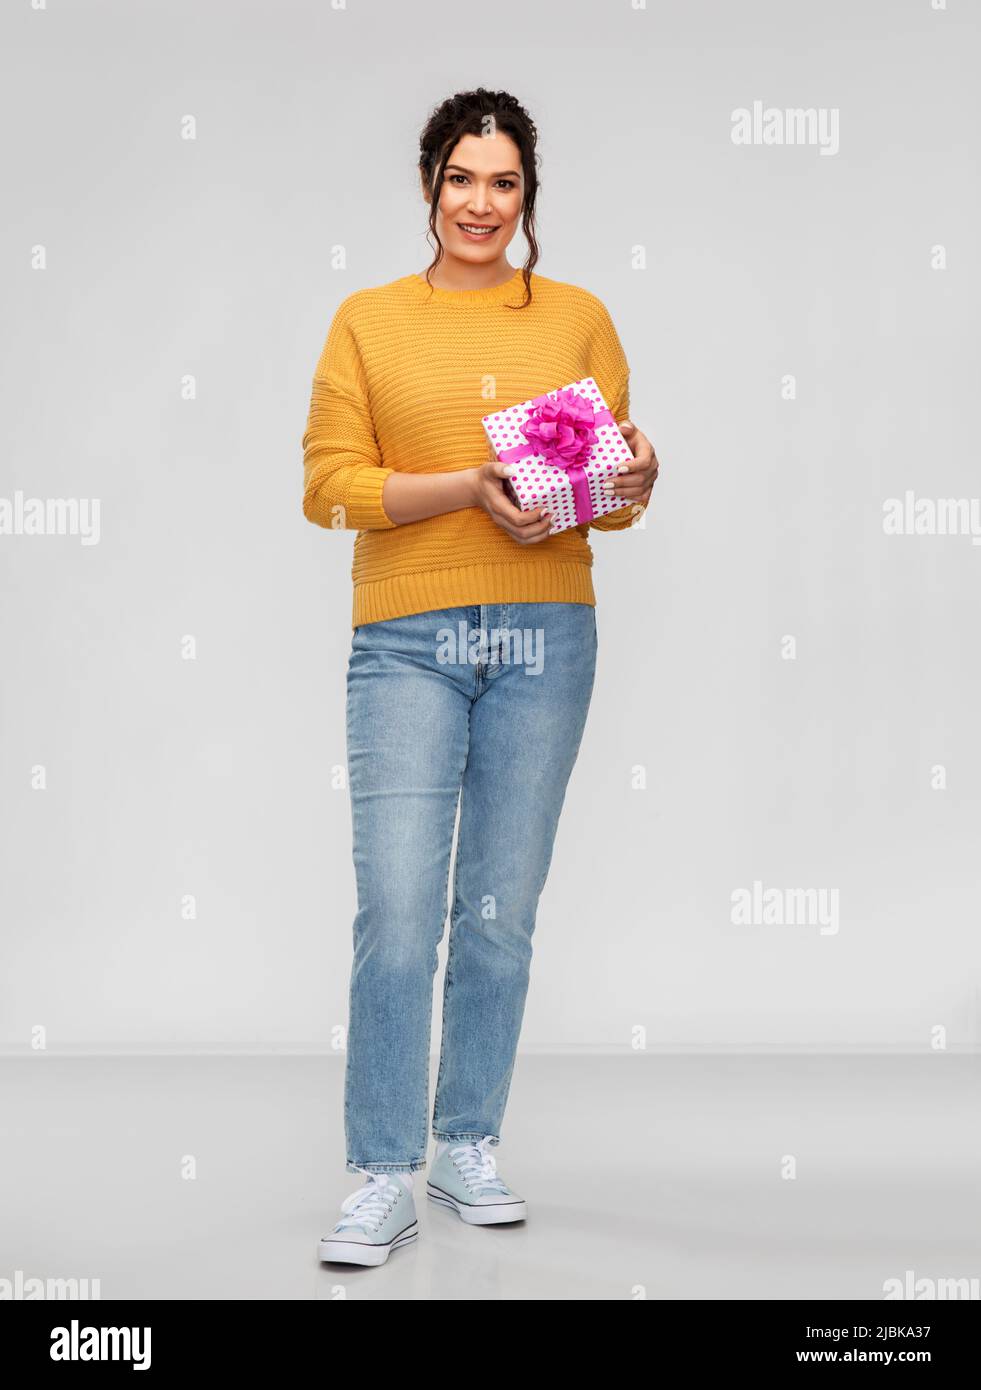 smiling young woman with gift box Stock Photo